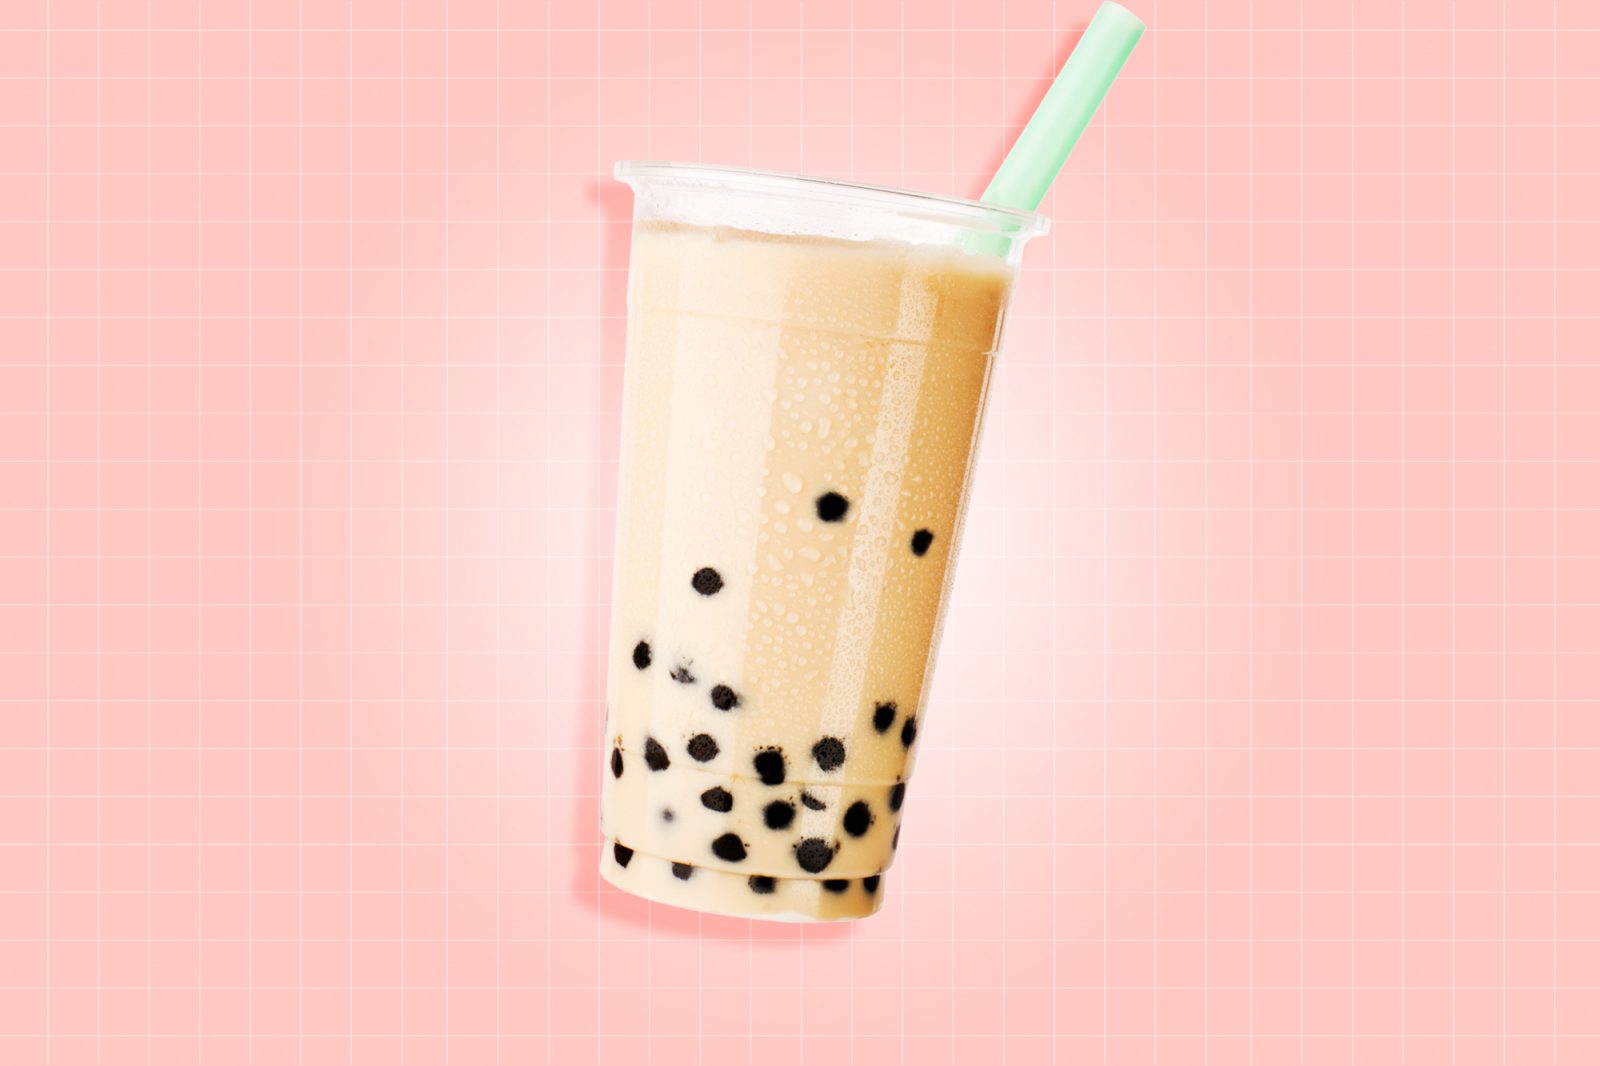 These Are the 32 Worst Foods in the Human Diet, According to AI – How Many Have You Eaten Recently? Bubble tea boba